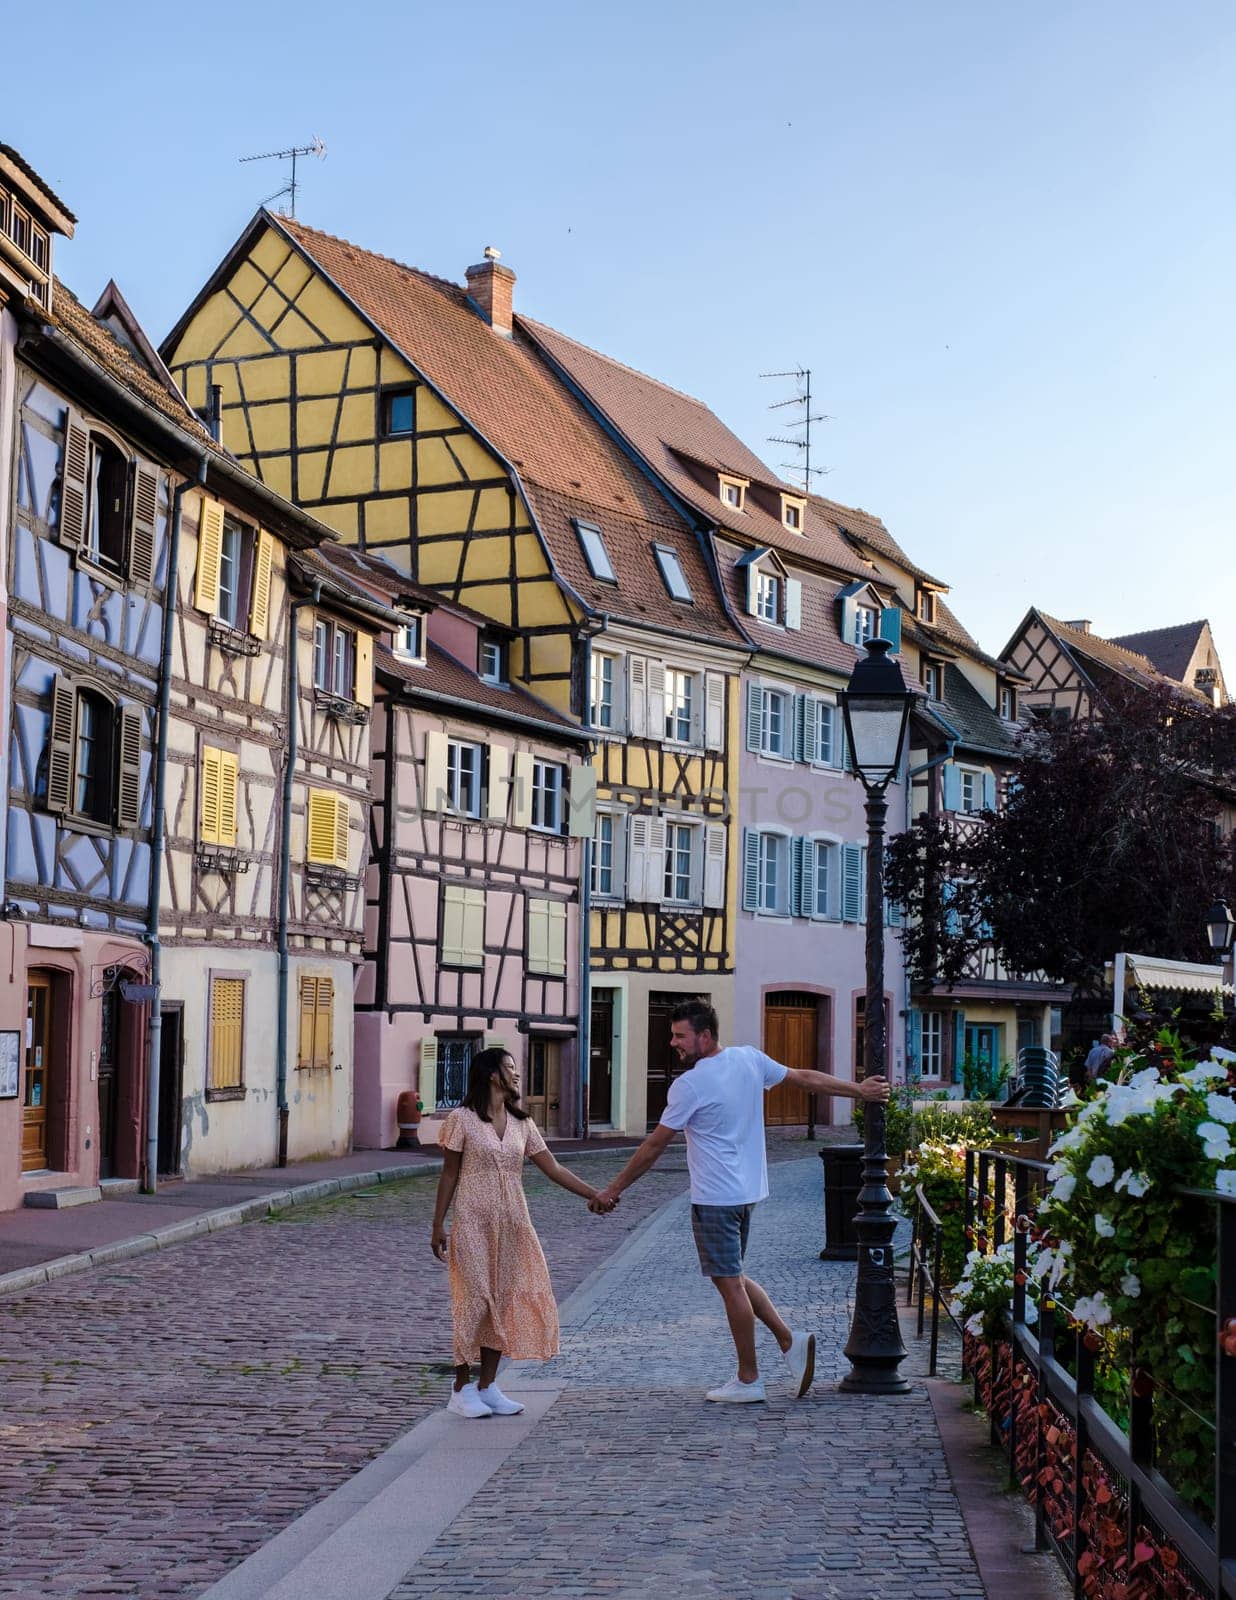 A couple of men and women on vacation at the romantic city Colmar, France, Alsace during summer, the Historic town of Colmar, Alsace region, France with beautiful canals called Le Petit Venice